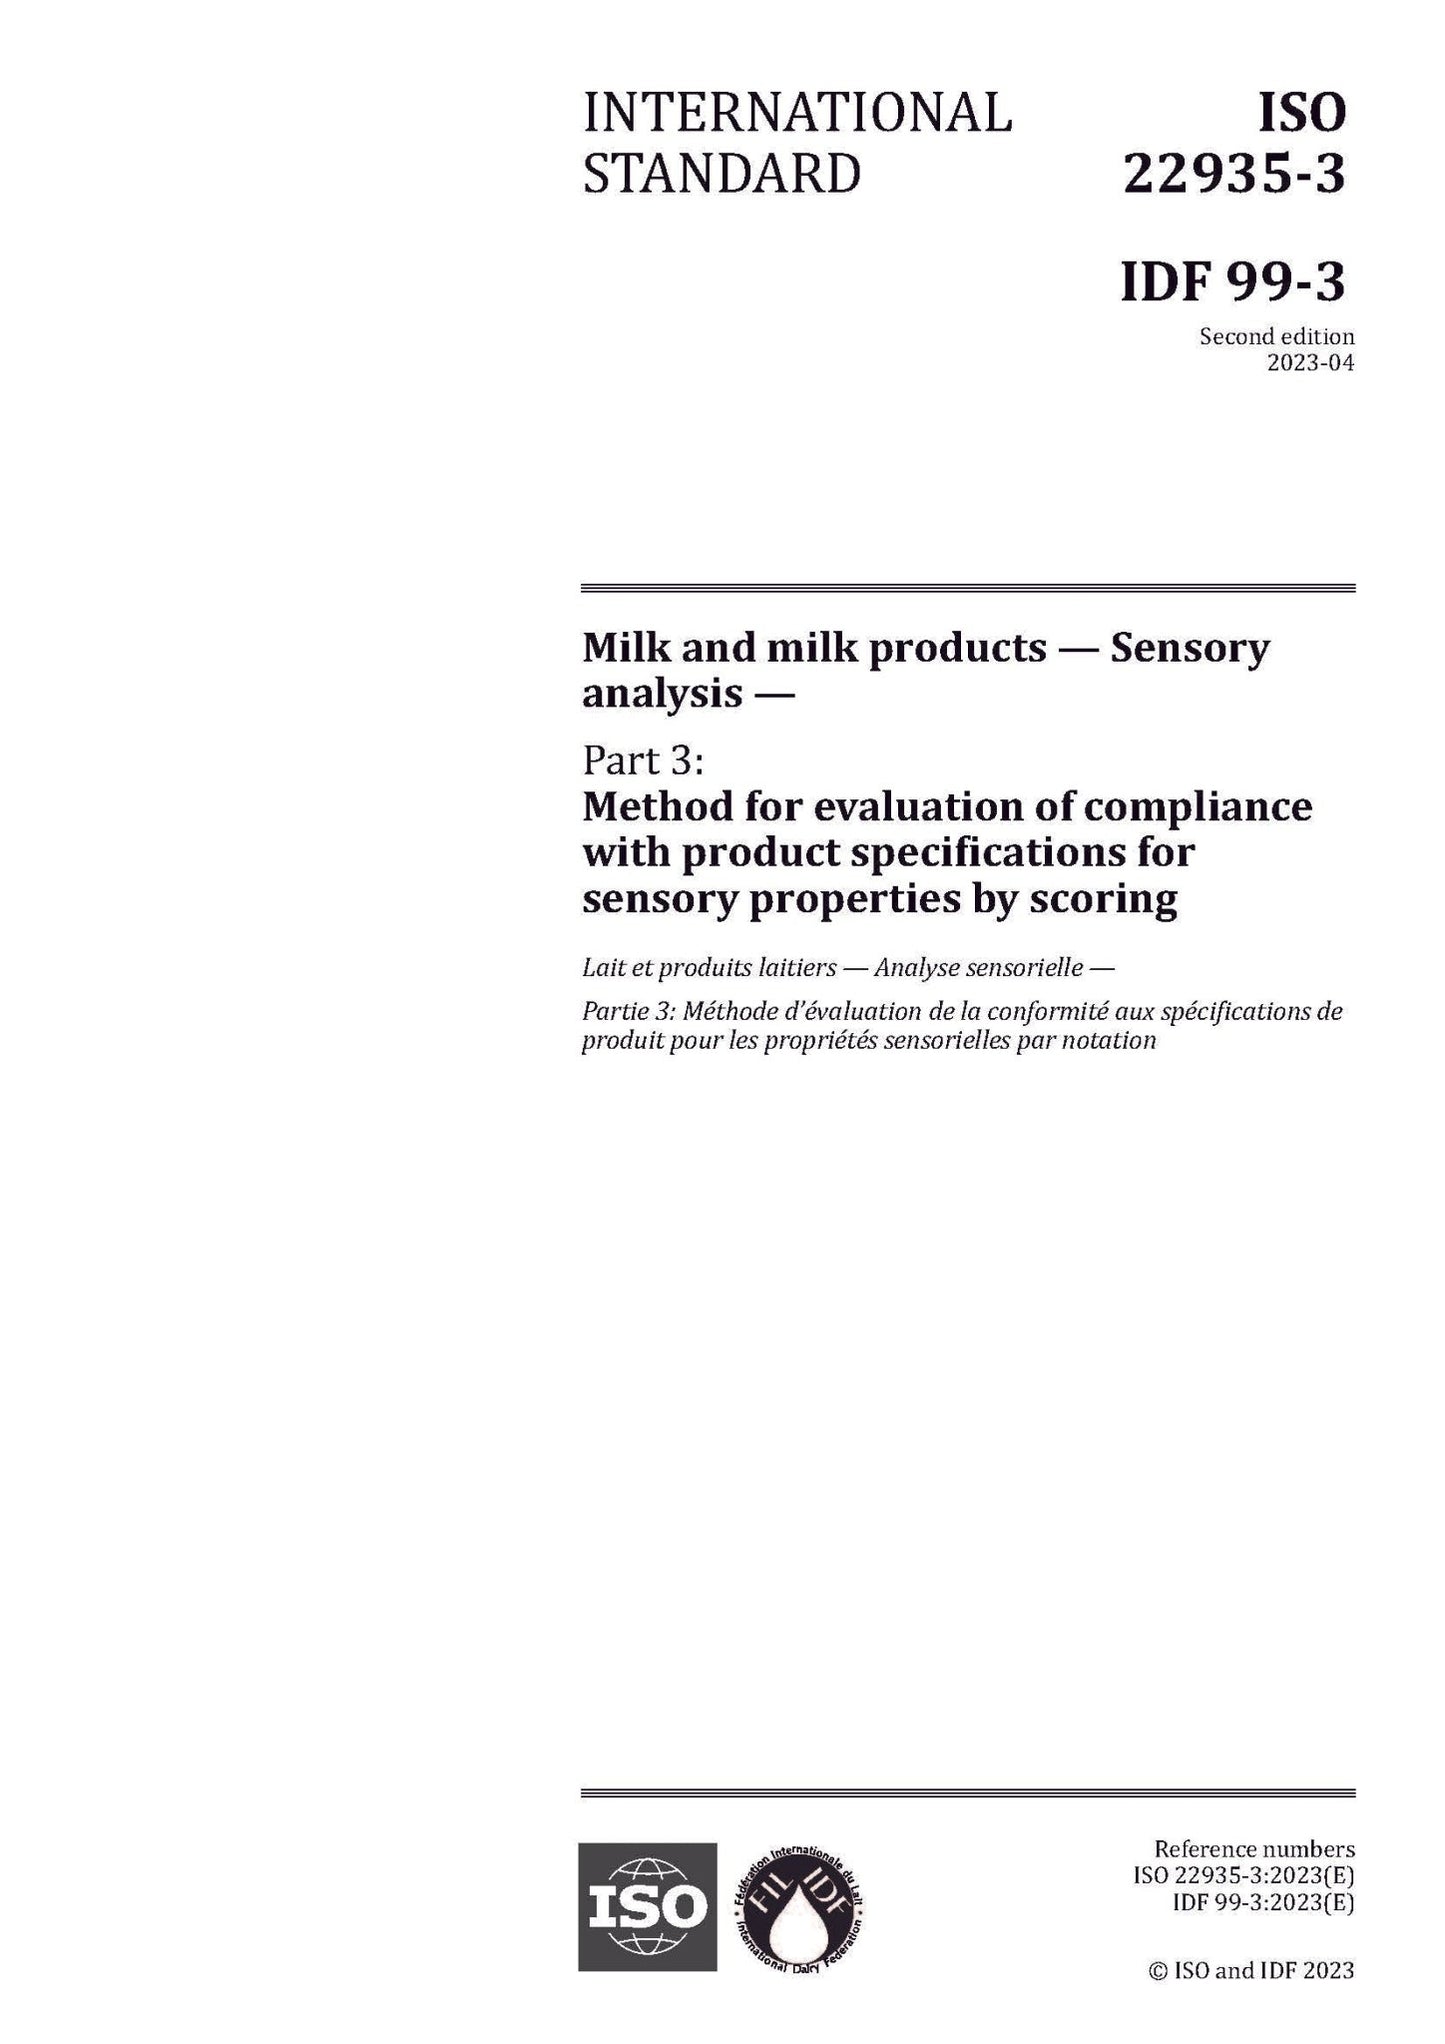 ISO 22935-3 | IDF 99-3: 2023 - Milk and milk products — Sensory analysis — Part 3: Method for evaluation of compliance with product specifications for sensory properties by scoring - FIL-IDF